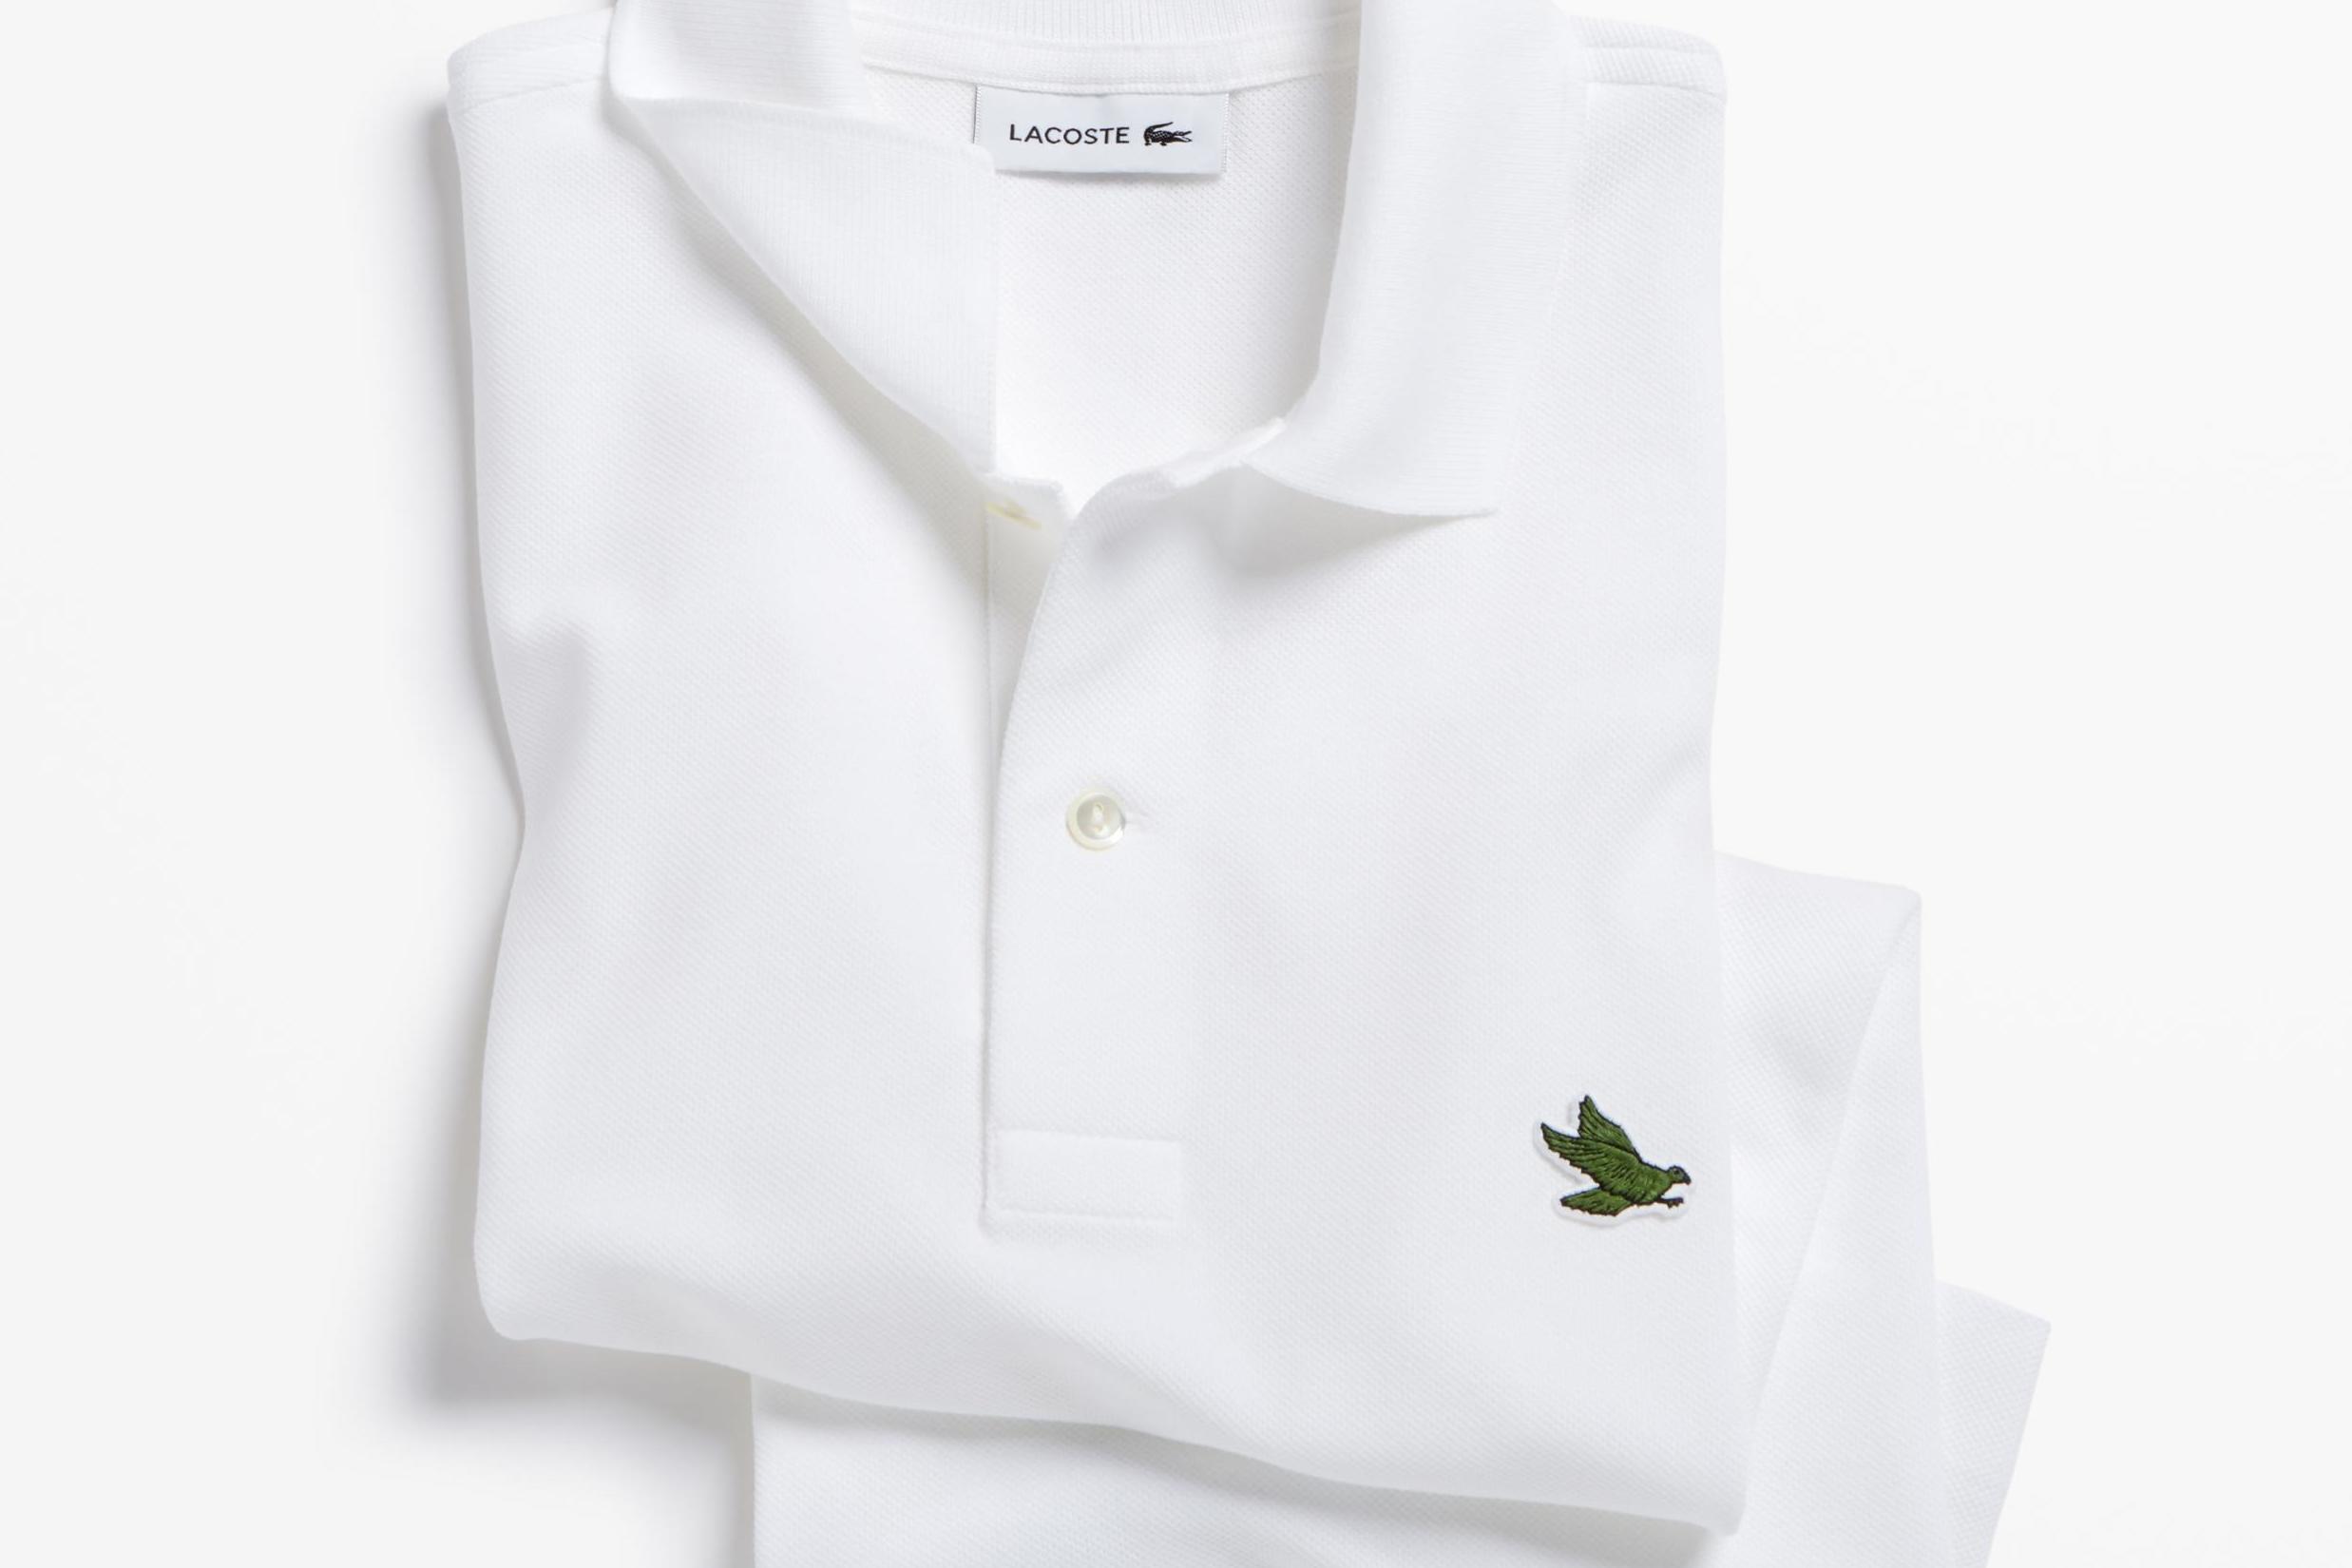 Lacoste Shirt Logo - Lacoste replaces iconic crocodile logo with endangered species as ...